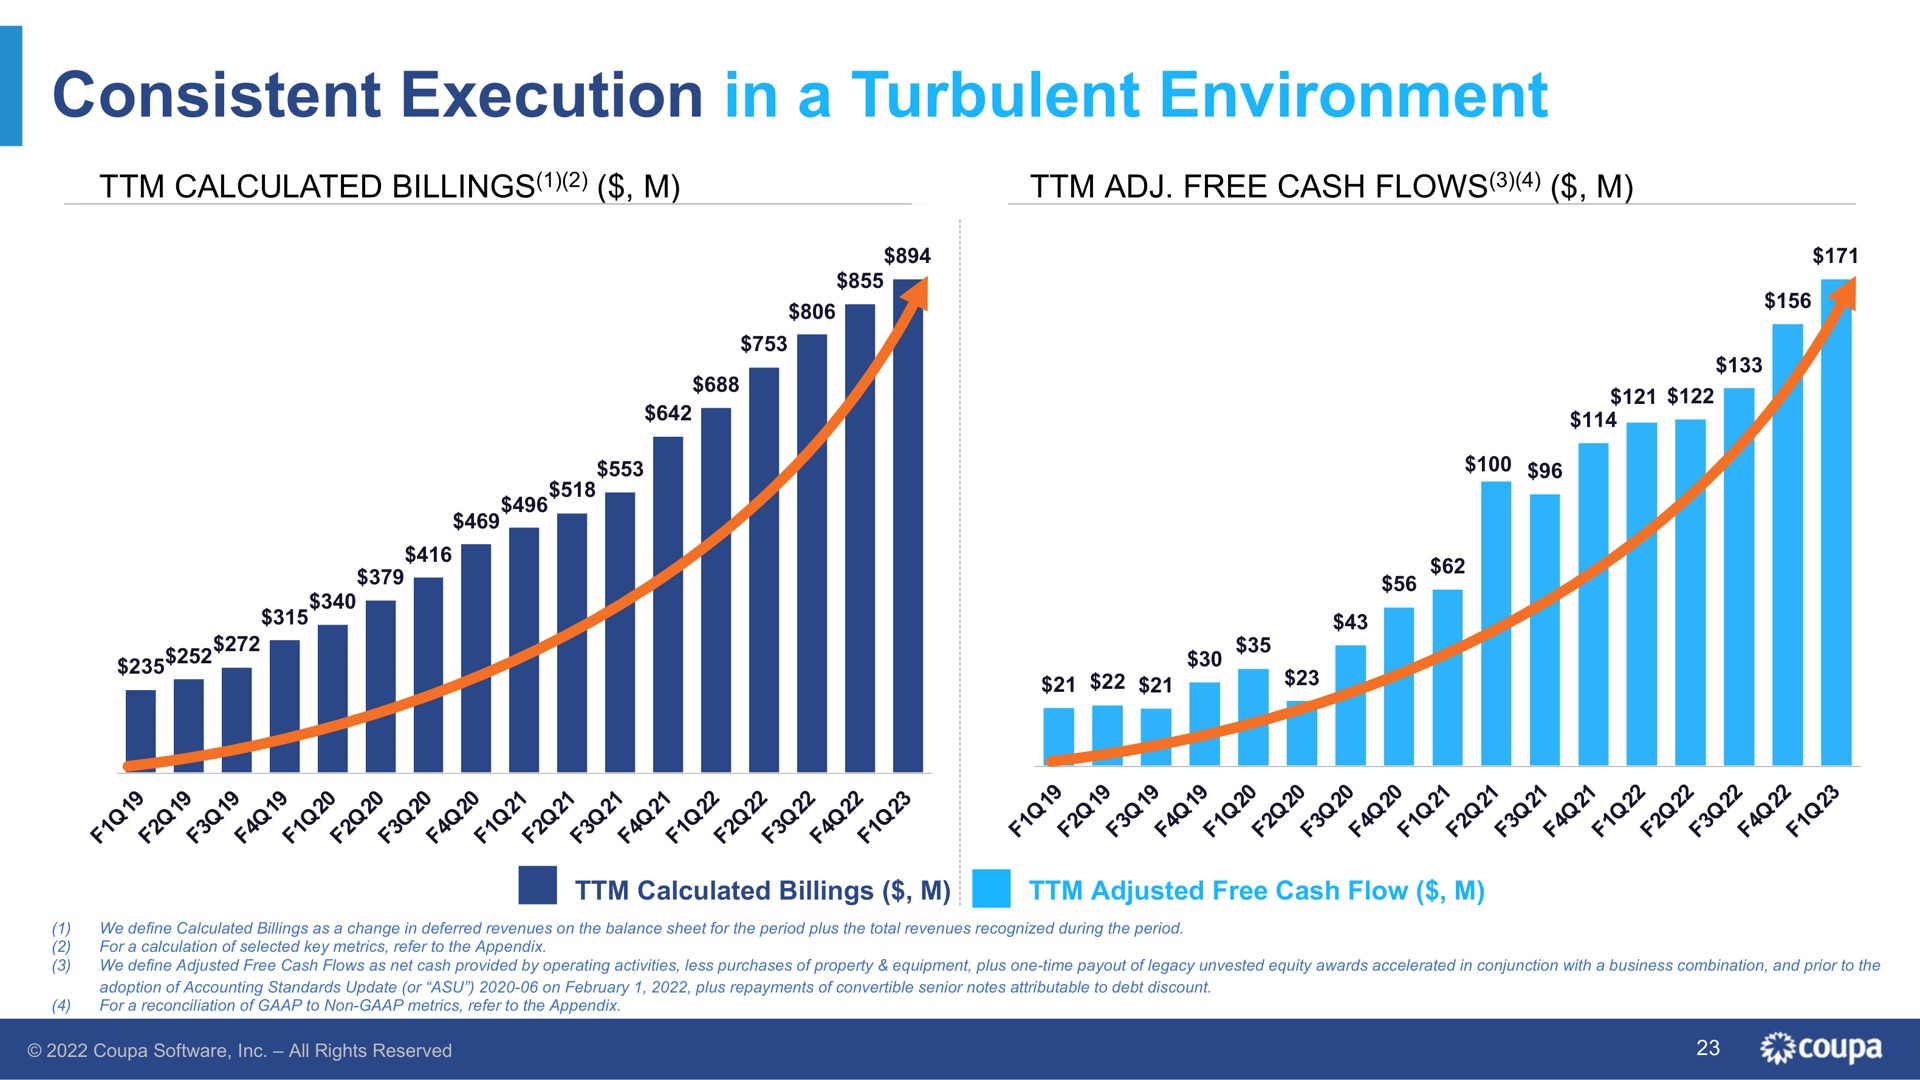 consistent execution in a turbulent environment he calculated billings adjusted free cash flow | Coupa